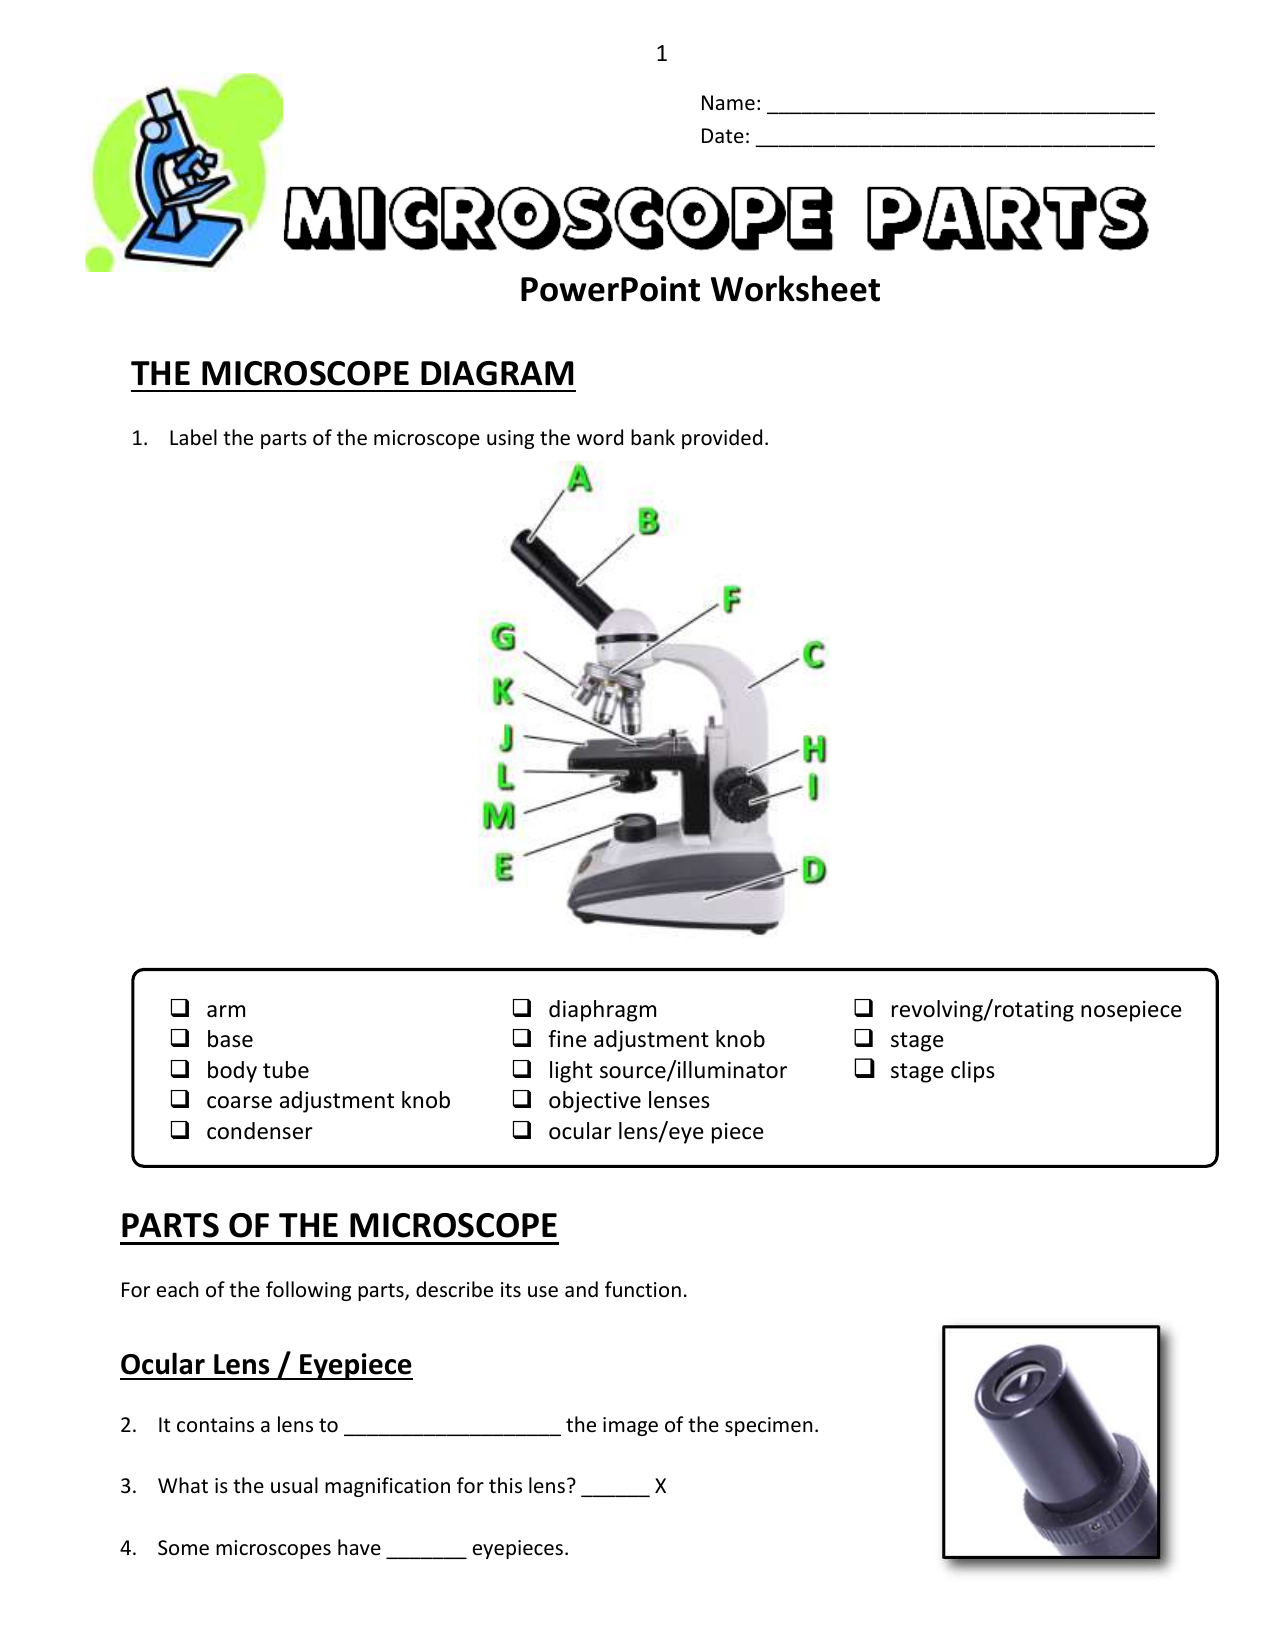 22 - Microscope Parts - PowerPoint Worksheet copy In Microscope Parts And Use Worksheet